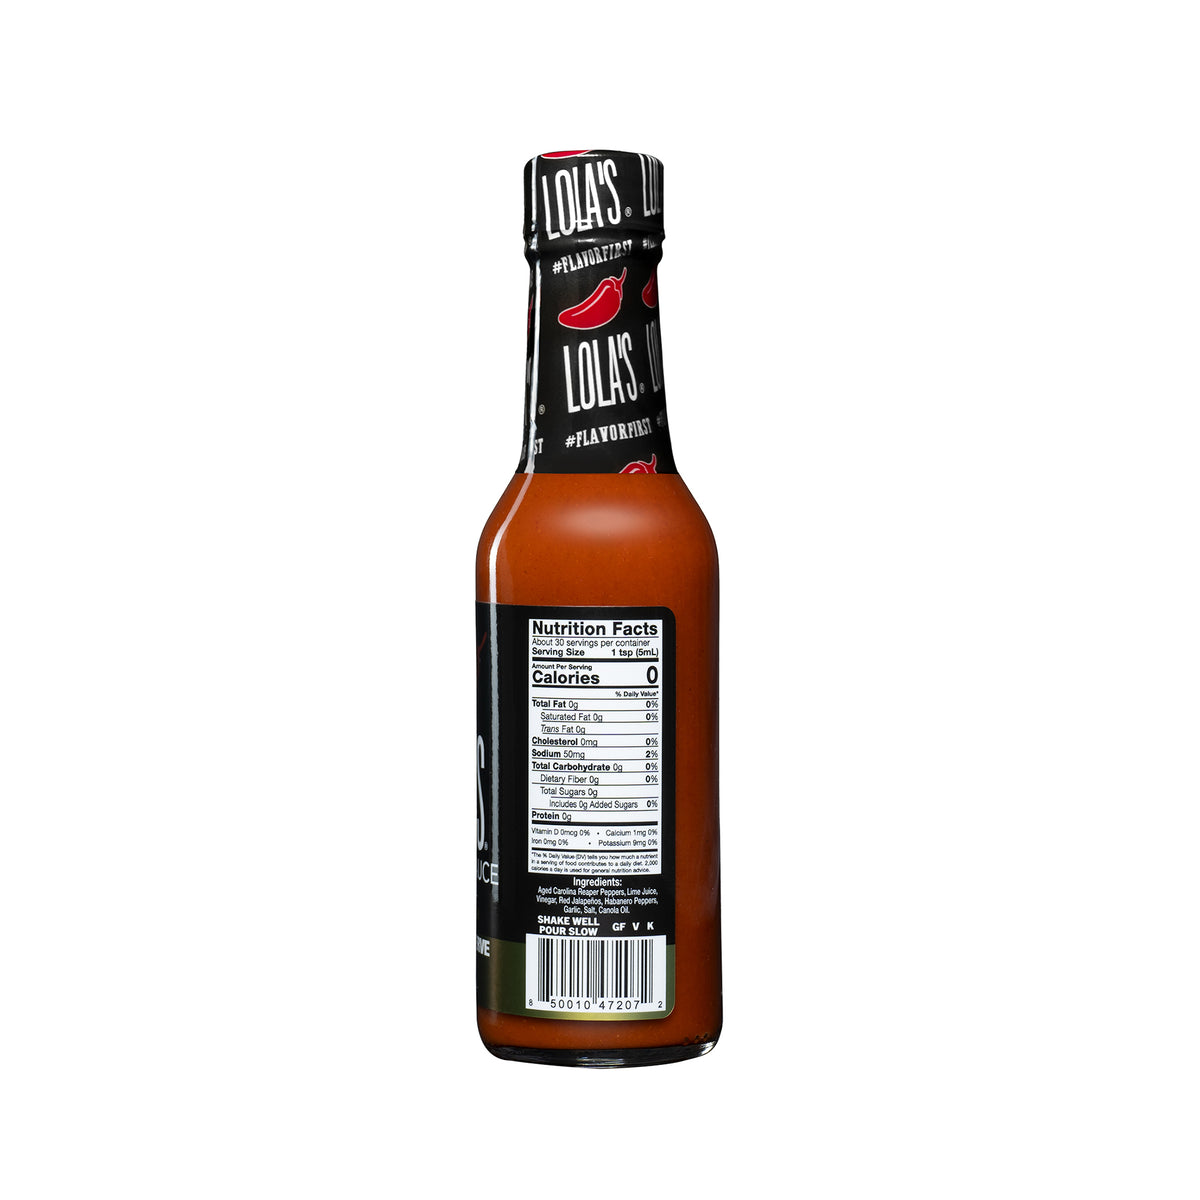 A glass bottle of Lola's Family Reserve Hot Sauce, featuring Carolina reaper and habanero peppers for a sweet, smoky, lime flavor with intense heat. 5 oz. bottle in a premium gift box.